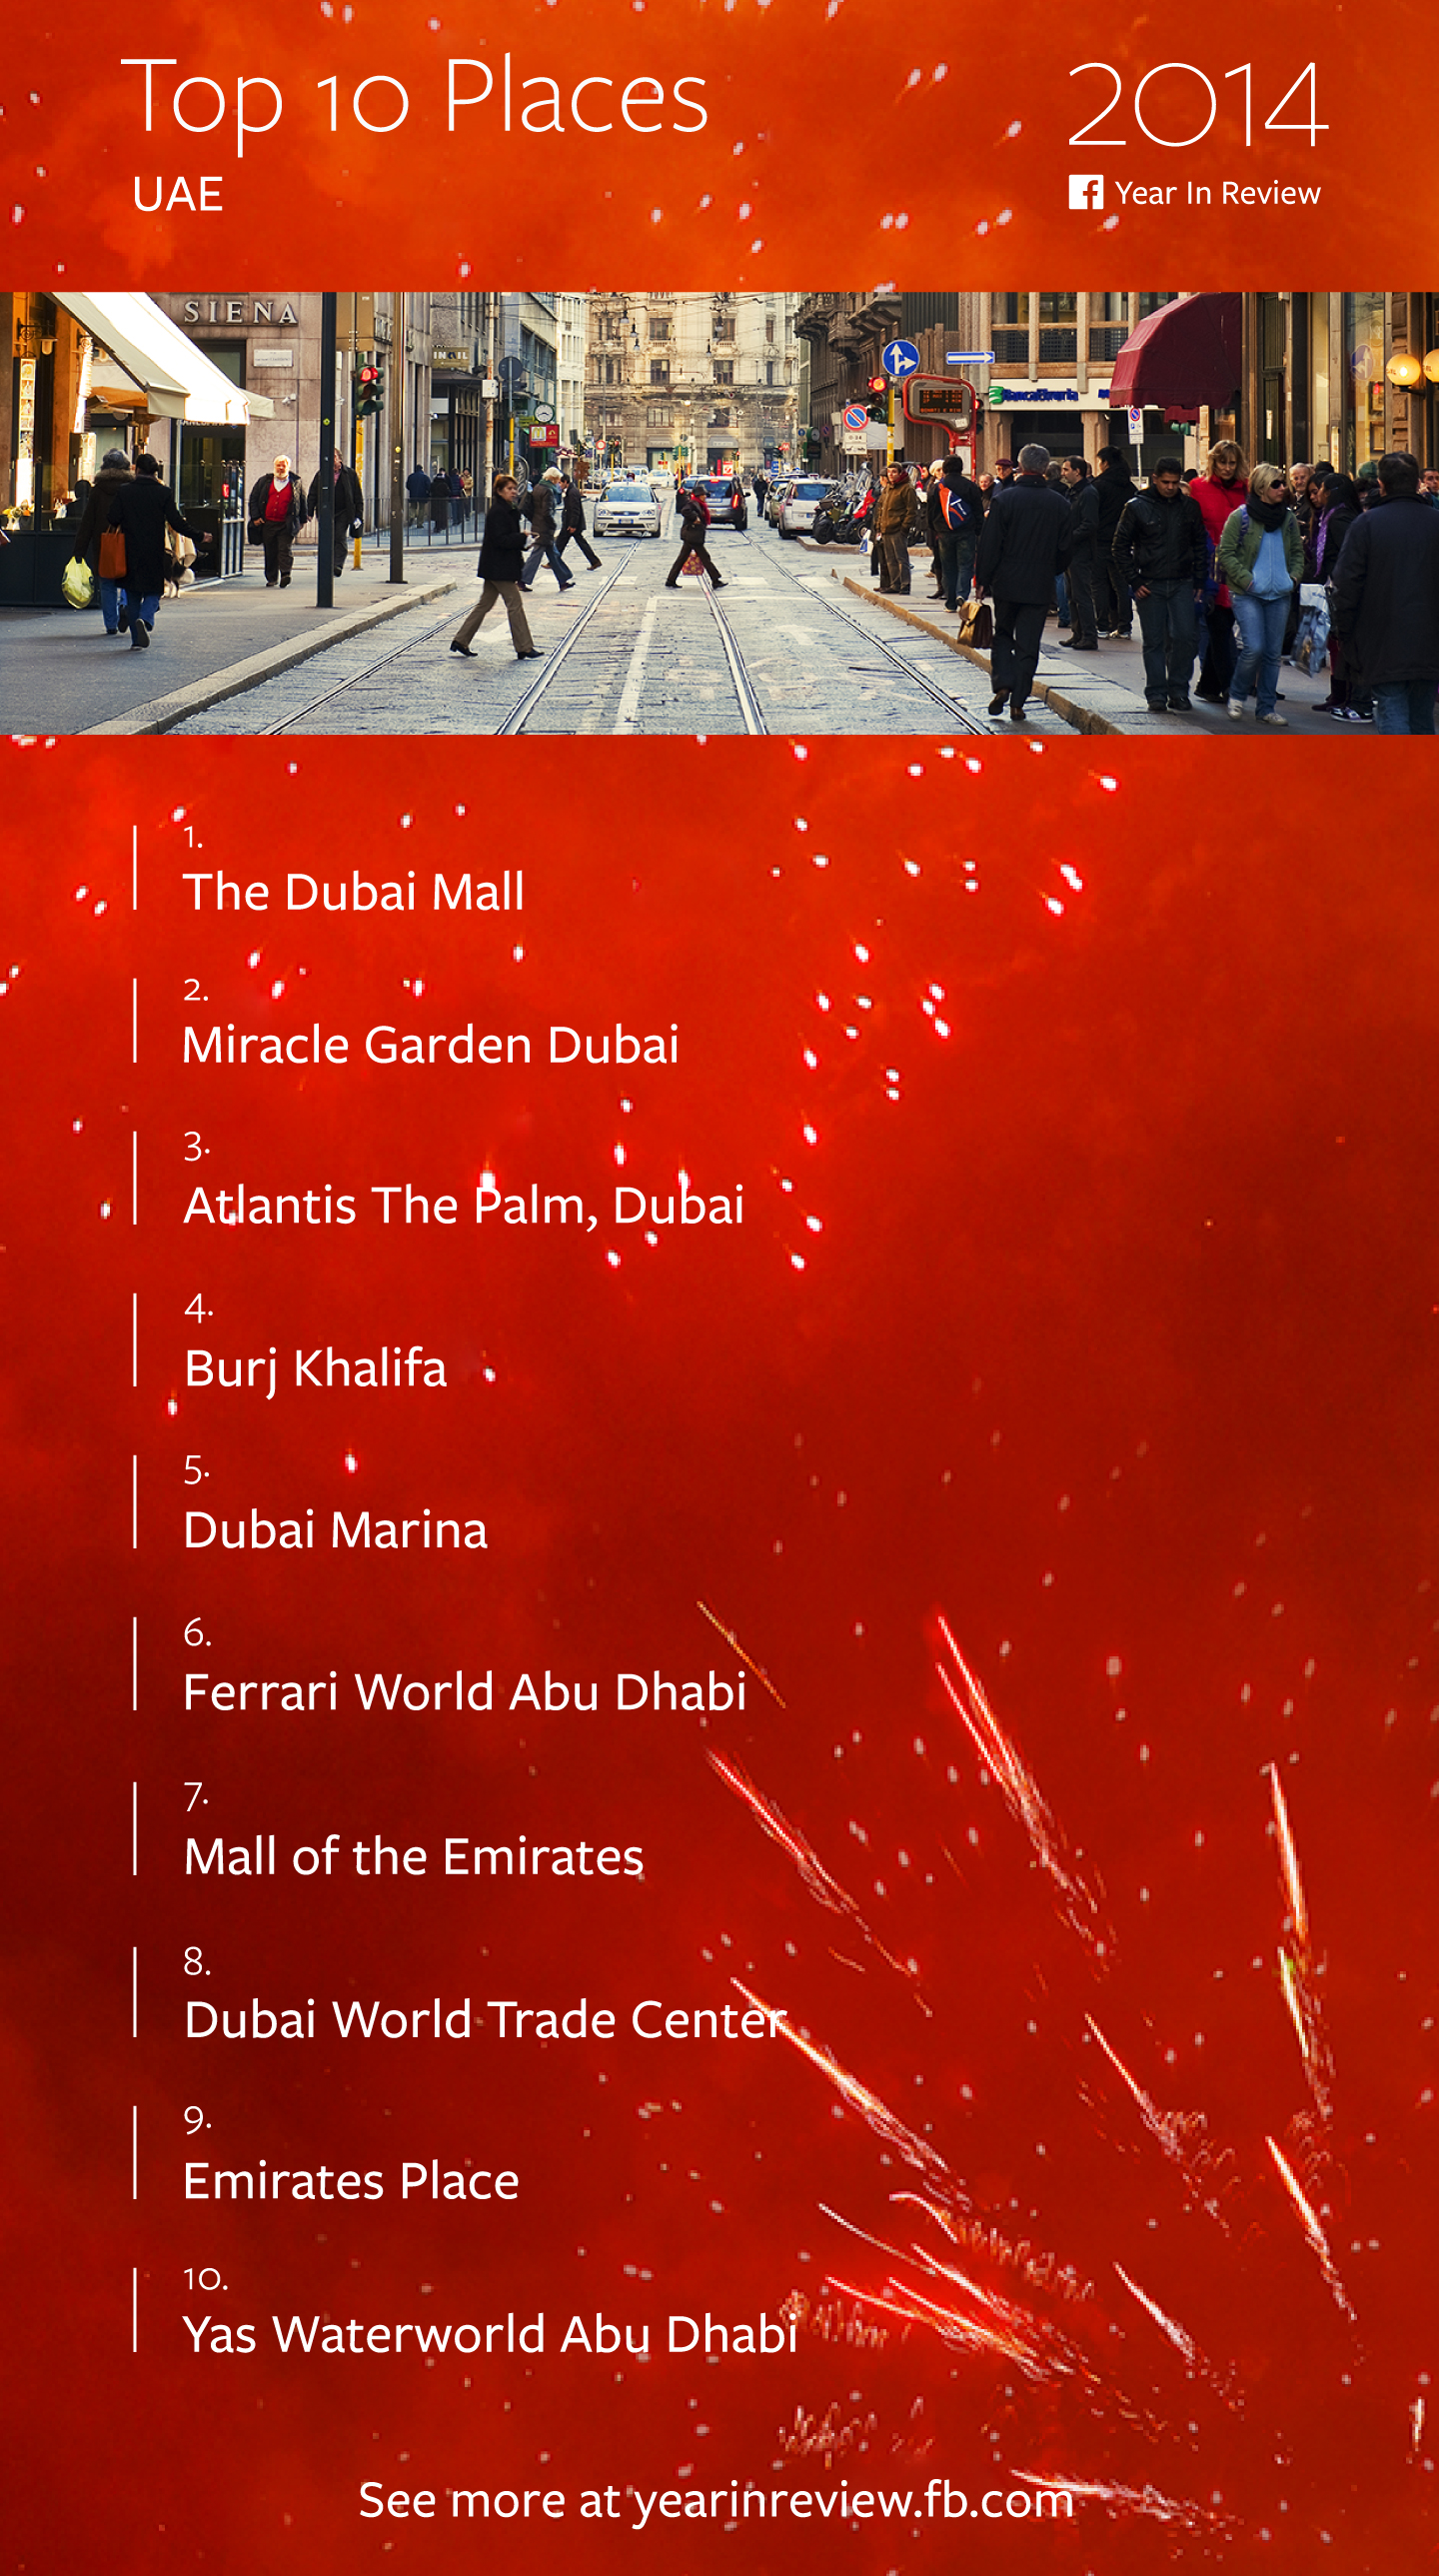 Facebook reveals the 2014 Top 10 most checked in places in UAE